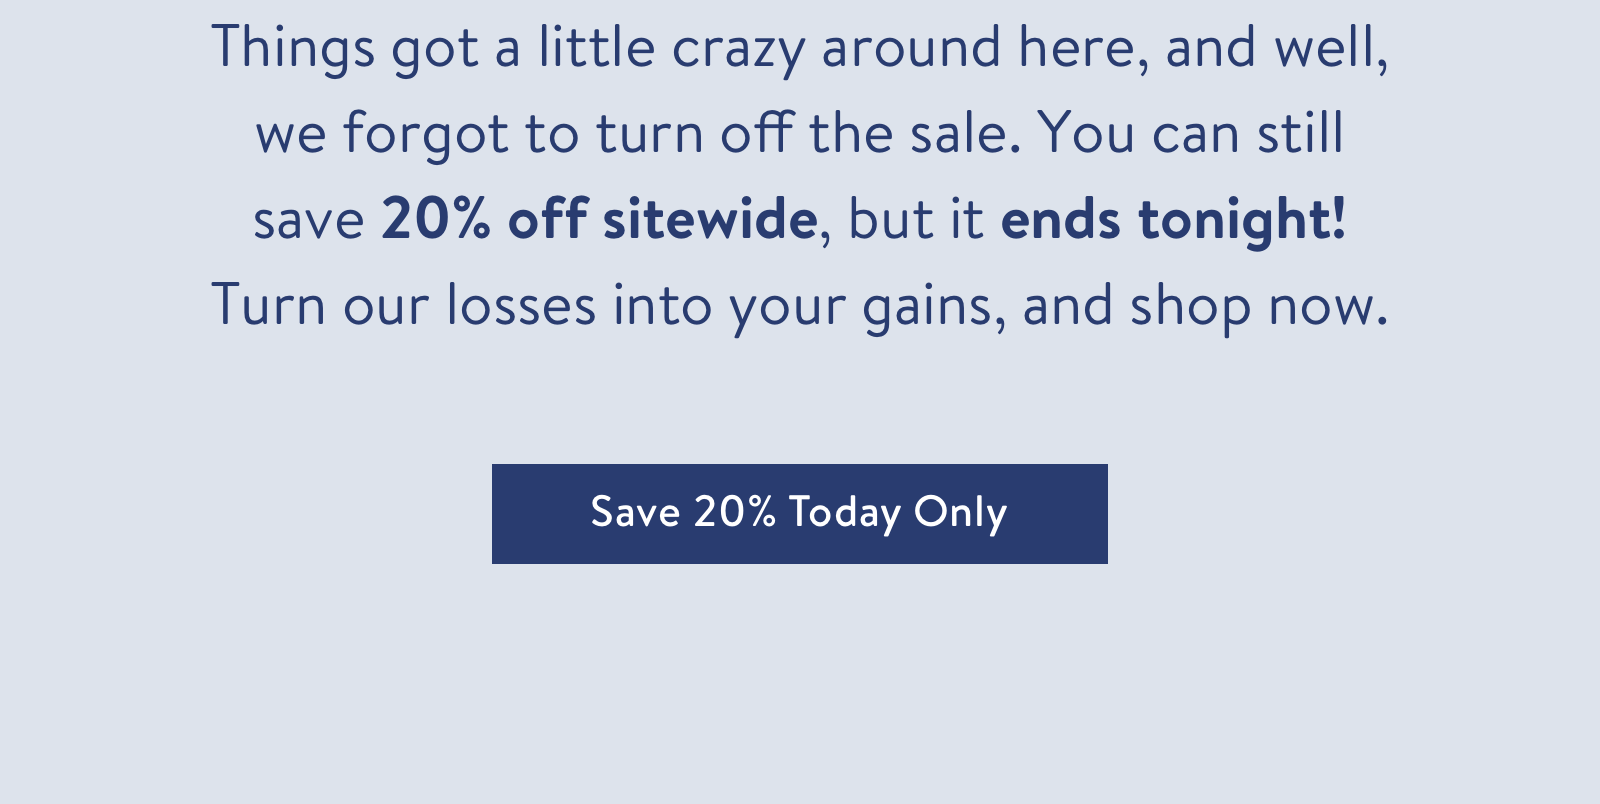 Things got a little crazy around here, and well, we forgot to turn off the sale. You can still save 20% off sitewide, but it ends tonight! Turn our losses into your gains, and shop now.